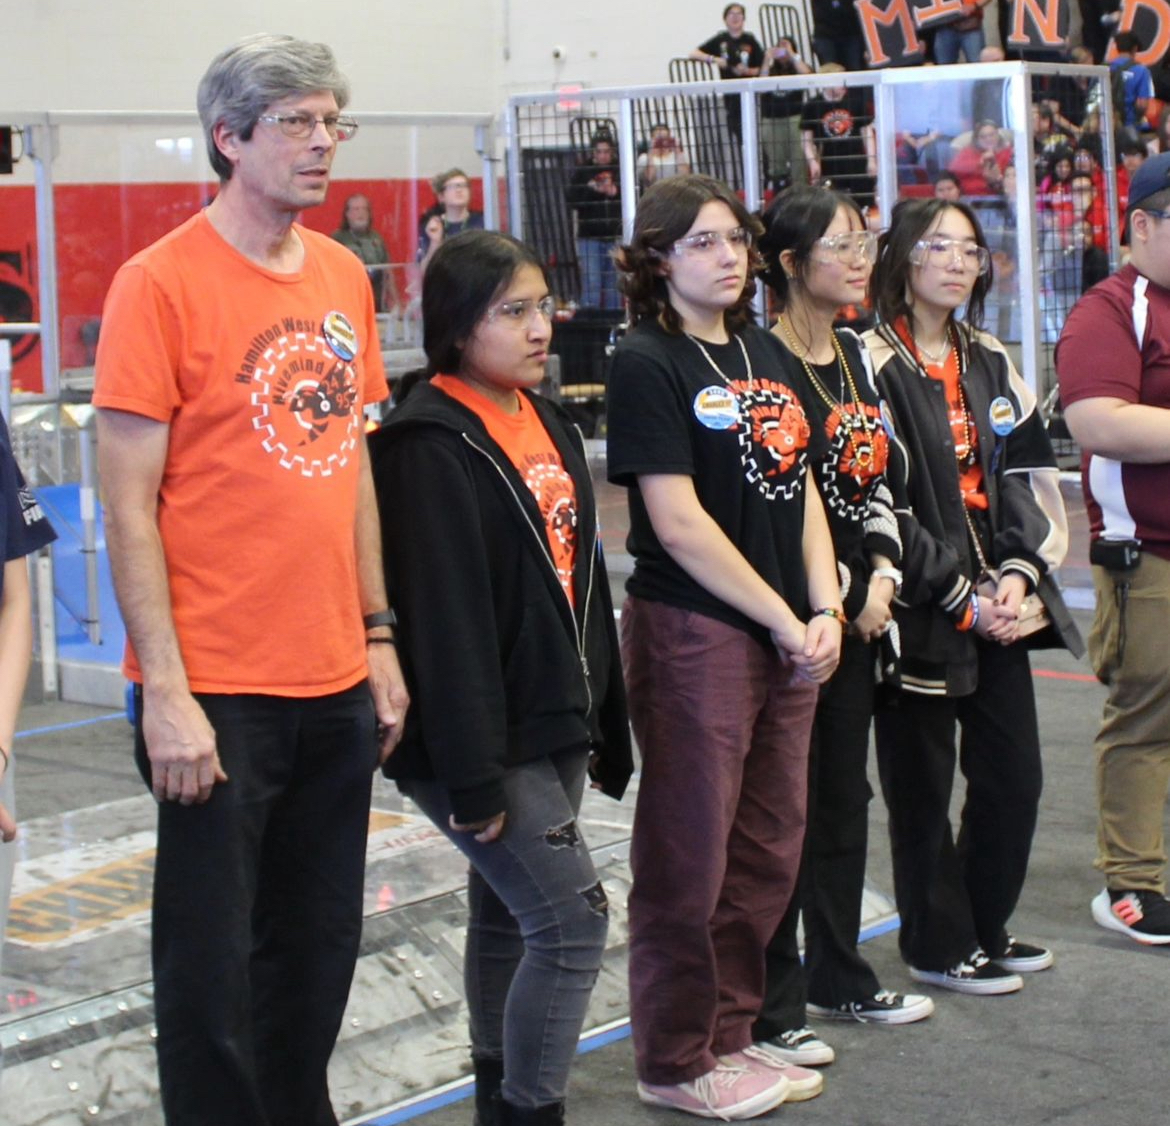 February 11th was International Women in Stem Day. The HHW Robotics Team has a dedicated group of young women who promote inclusivity and participation of women in STEM fields every day! 🤖